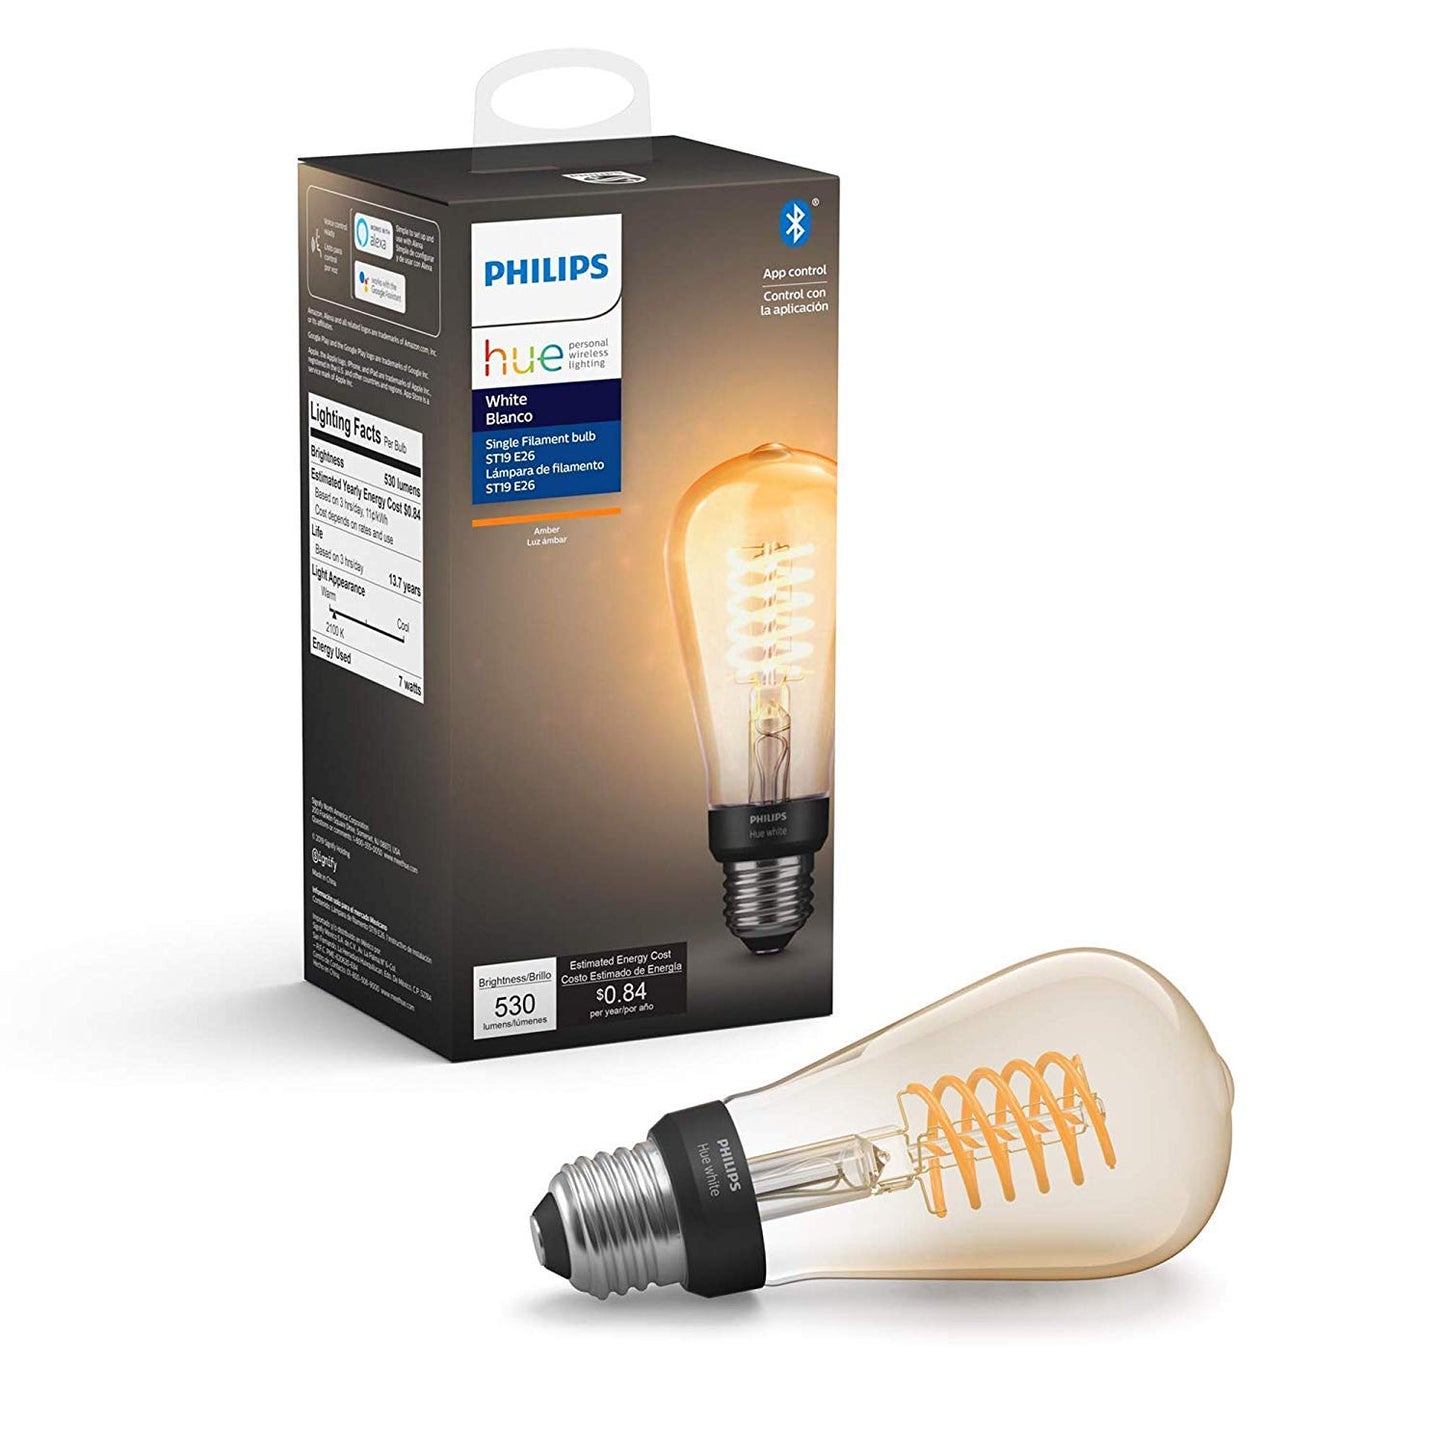 Philips Hue White Dimmable Filament A19 Smart Edison Vintage LED bulb, Bluetooth & Hub compatible (Hue Hub Optional), voice activated with Alexa